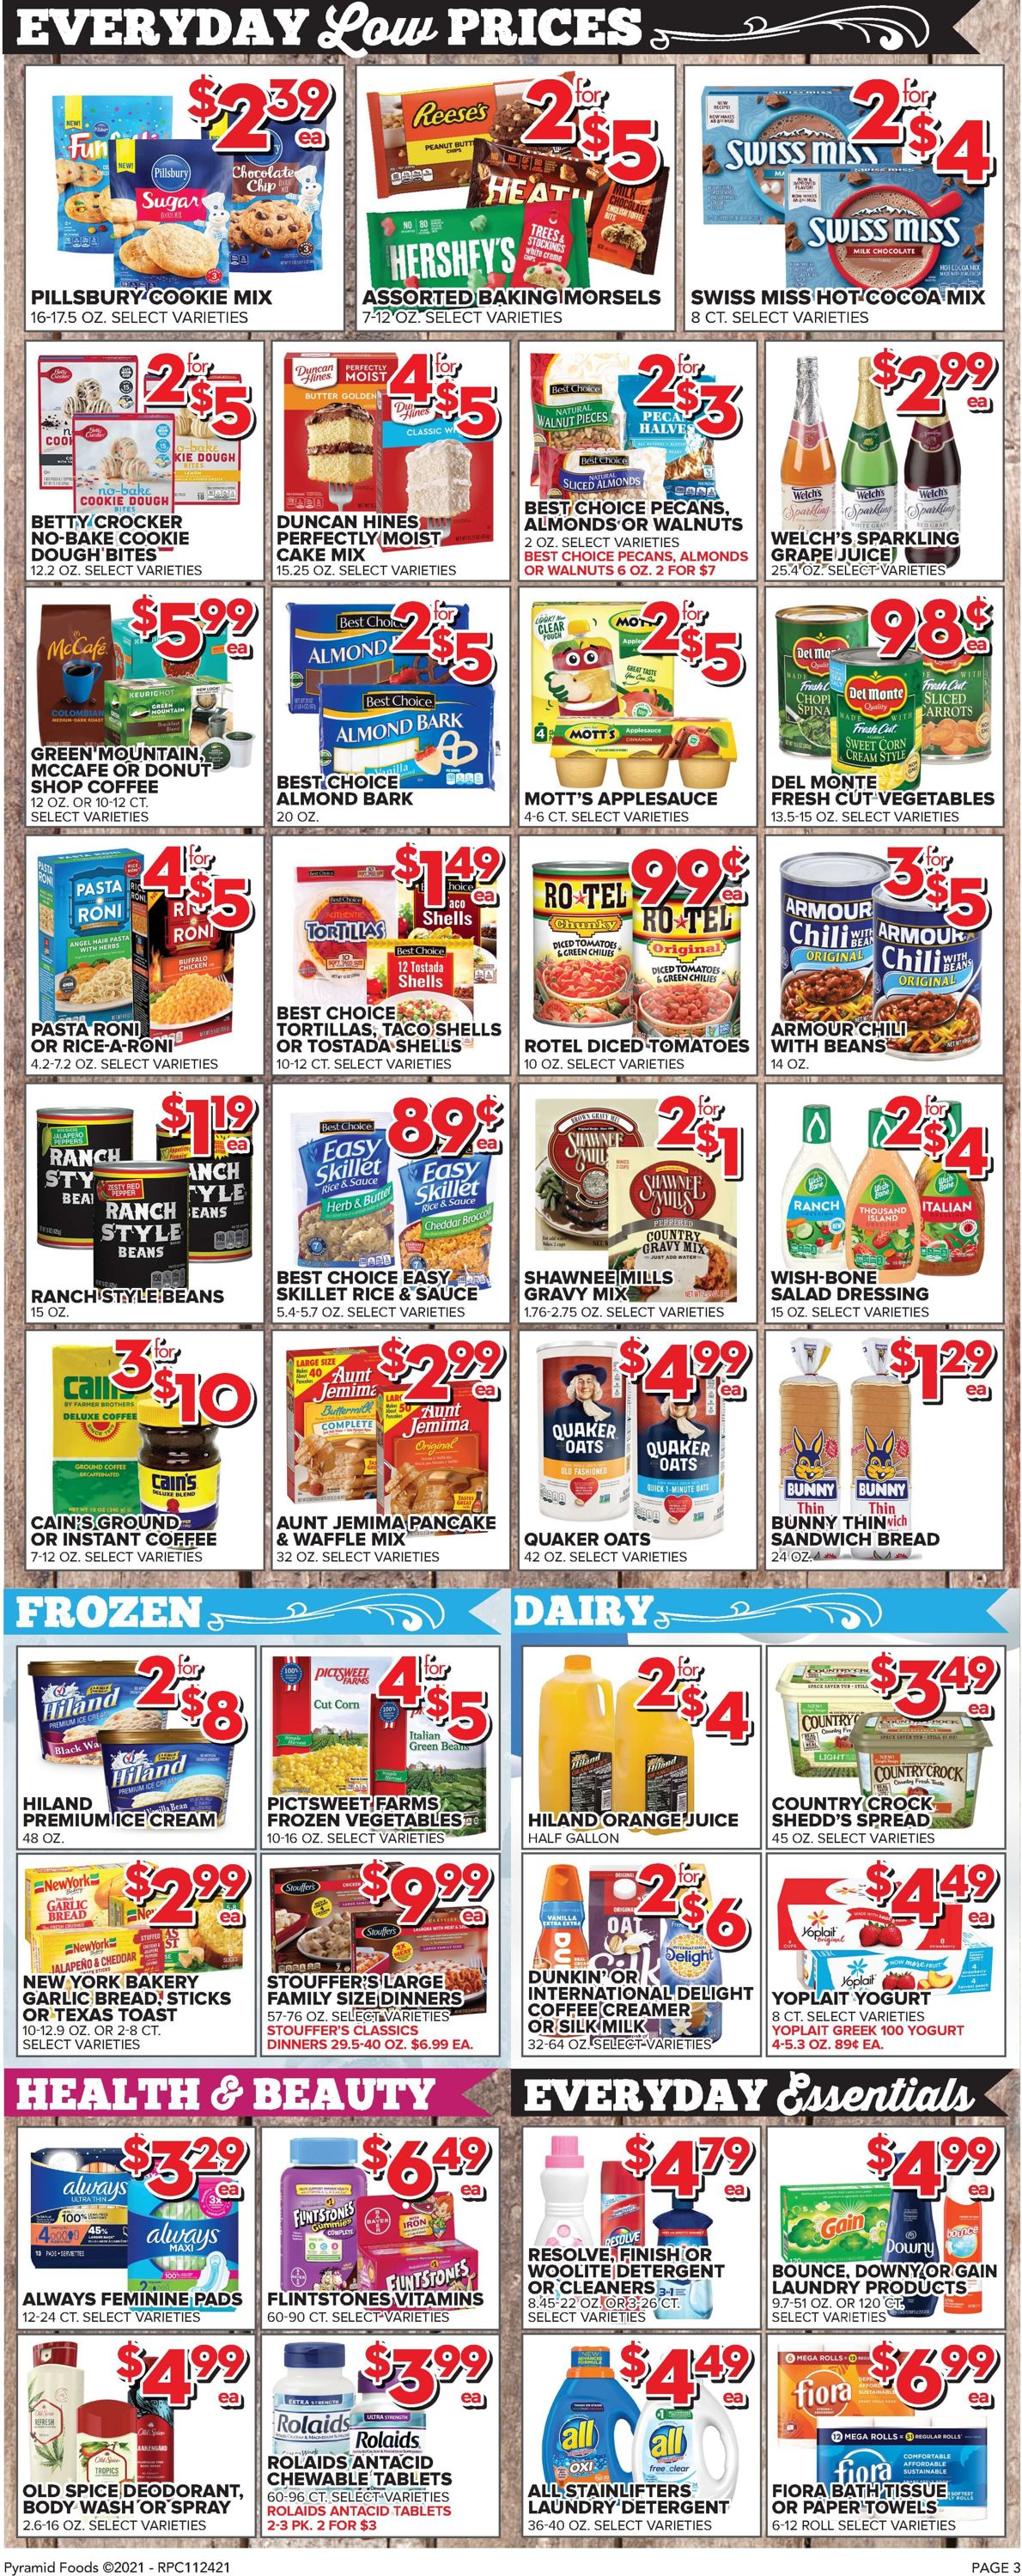 Price Cutter HOLIDAY 2021 Weekly Ad Circular - valid 11/24-11/30/2021 (Page 3)